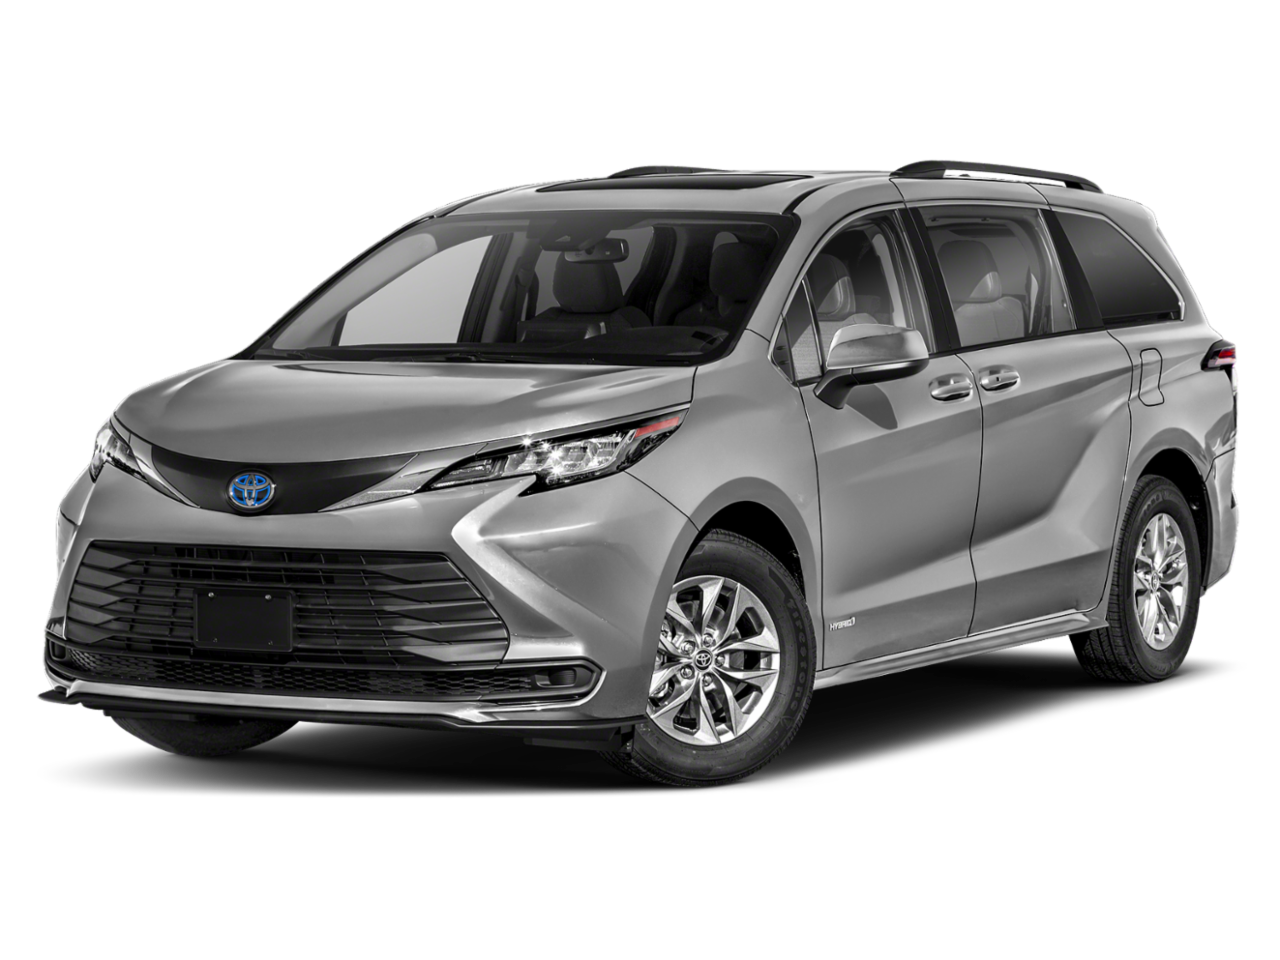 New Toyota Sienna from your Great Falls, MT dealership, City Motor Company.